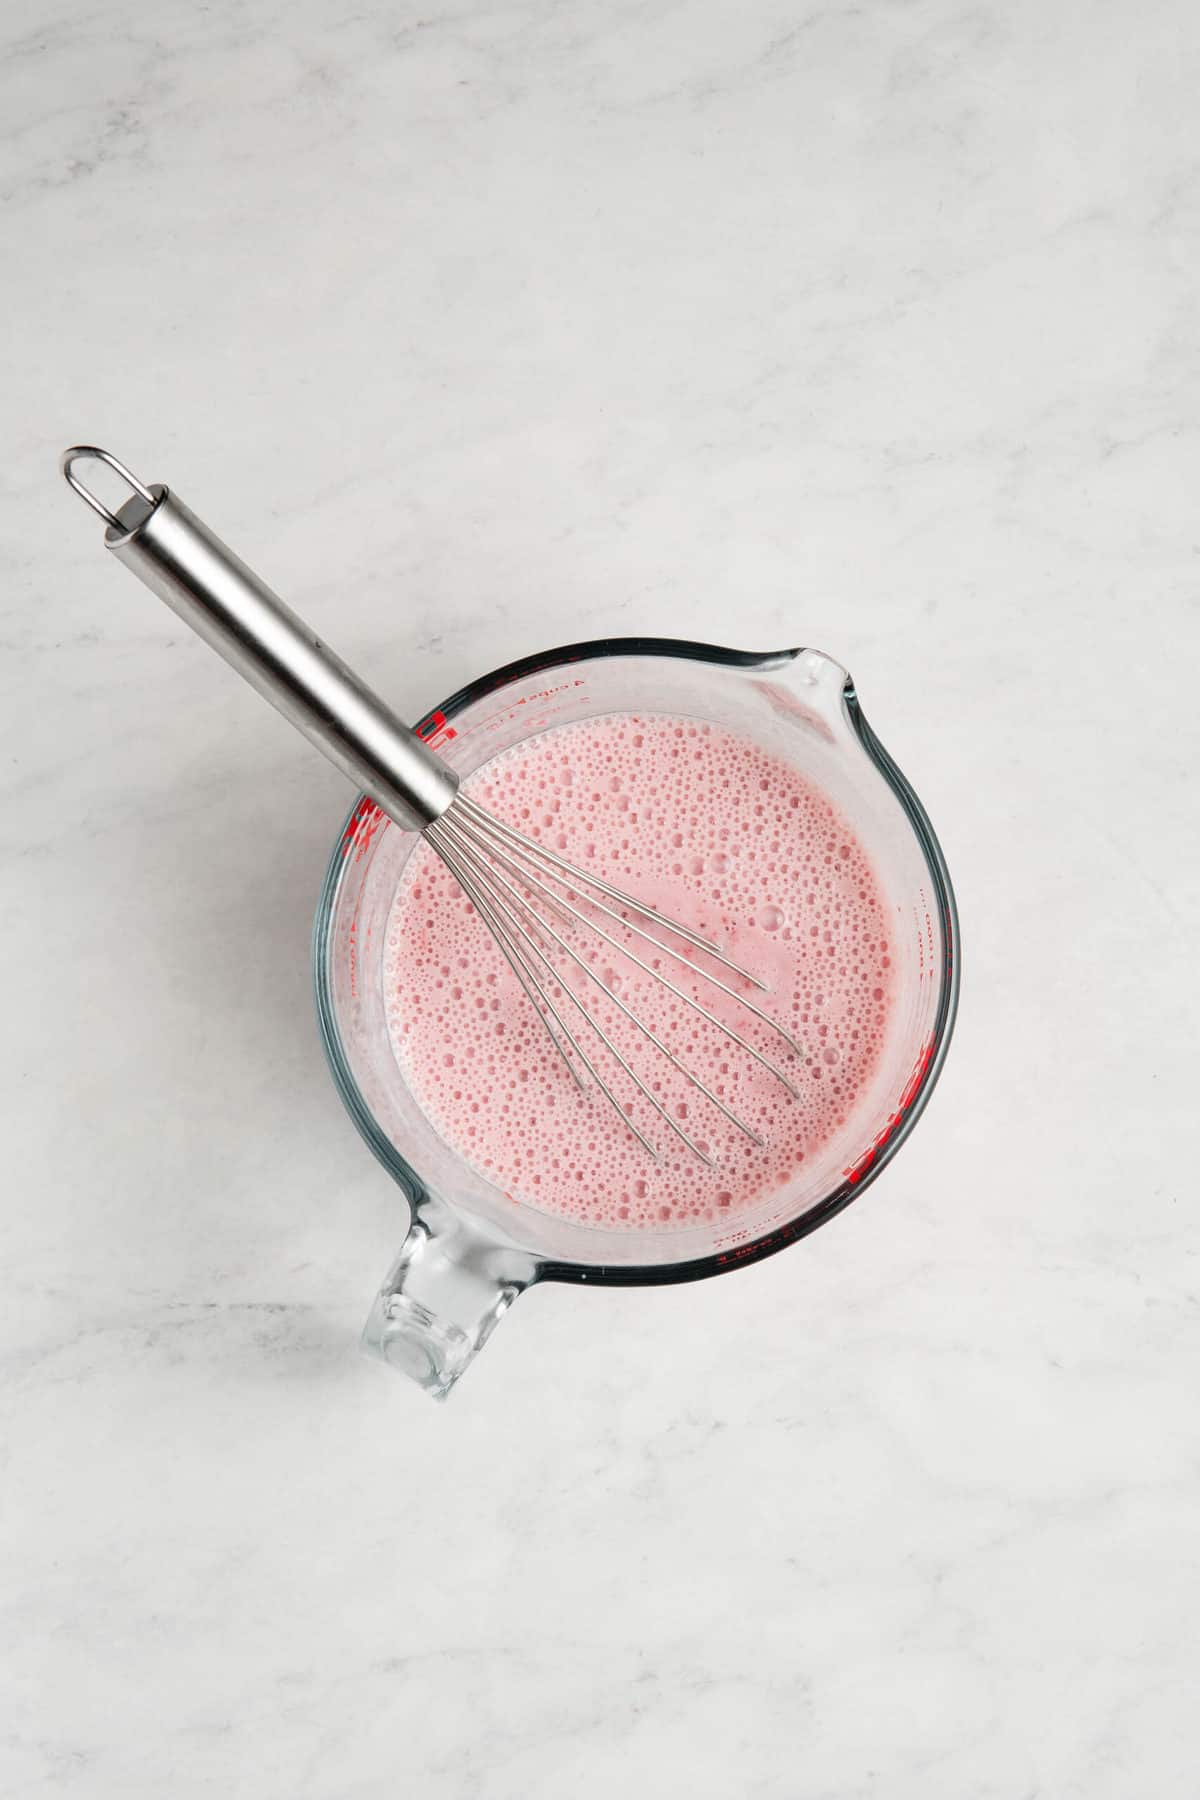 strawberry puree, egg whites, and buttermilk in a glass measuring cup.